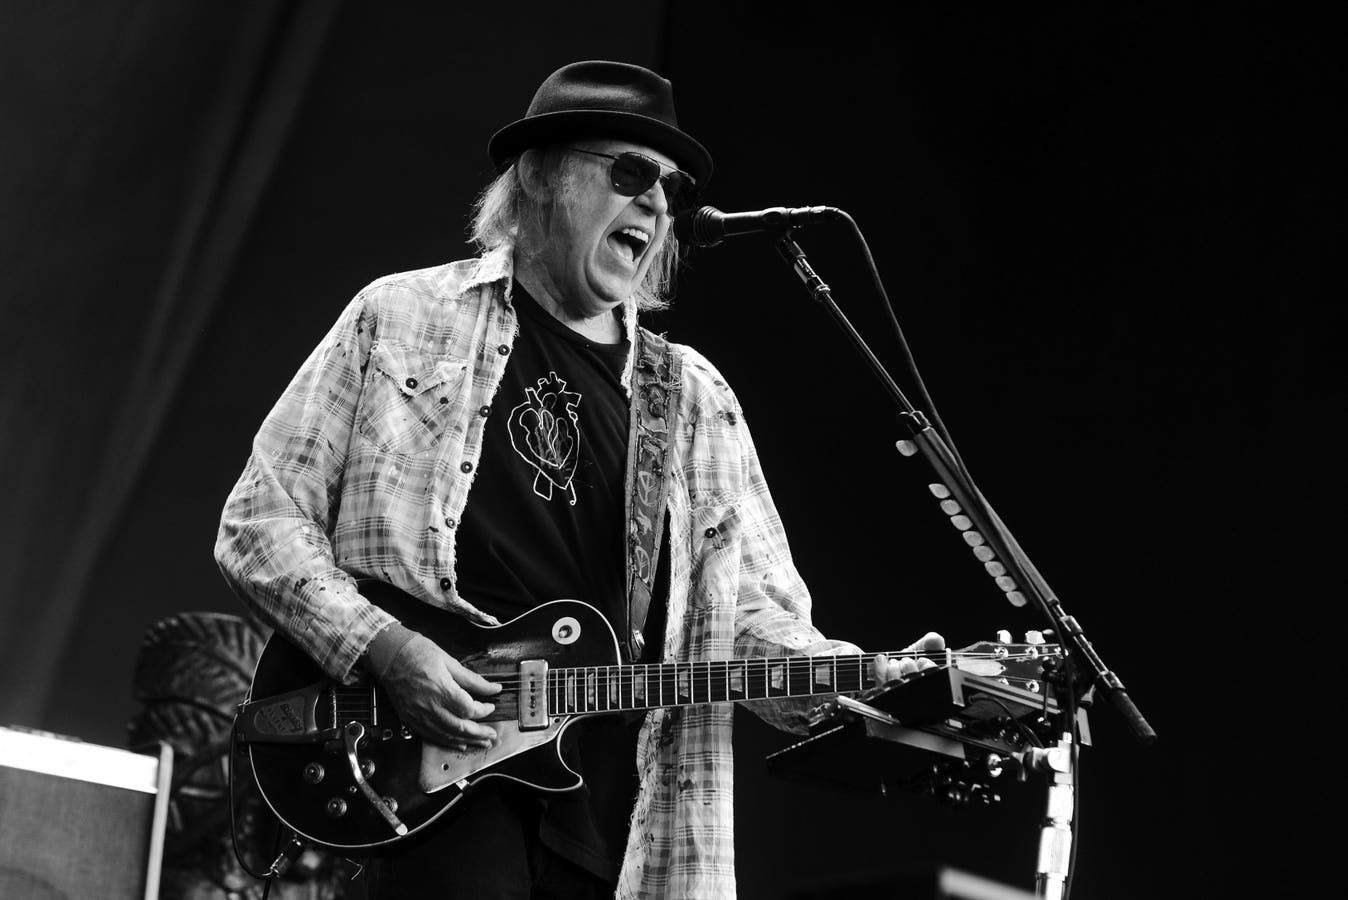 Neil Young Lands Yet Another Bestseller With His Latest Album